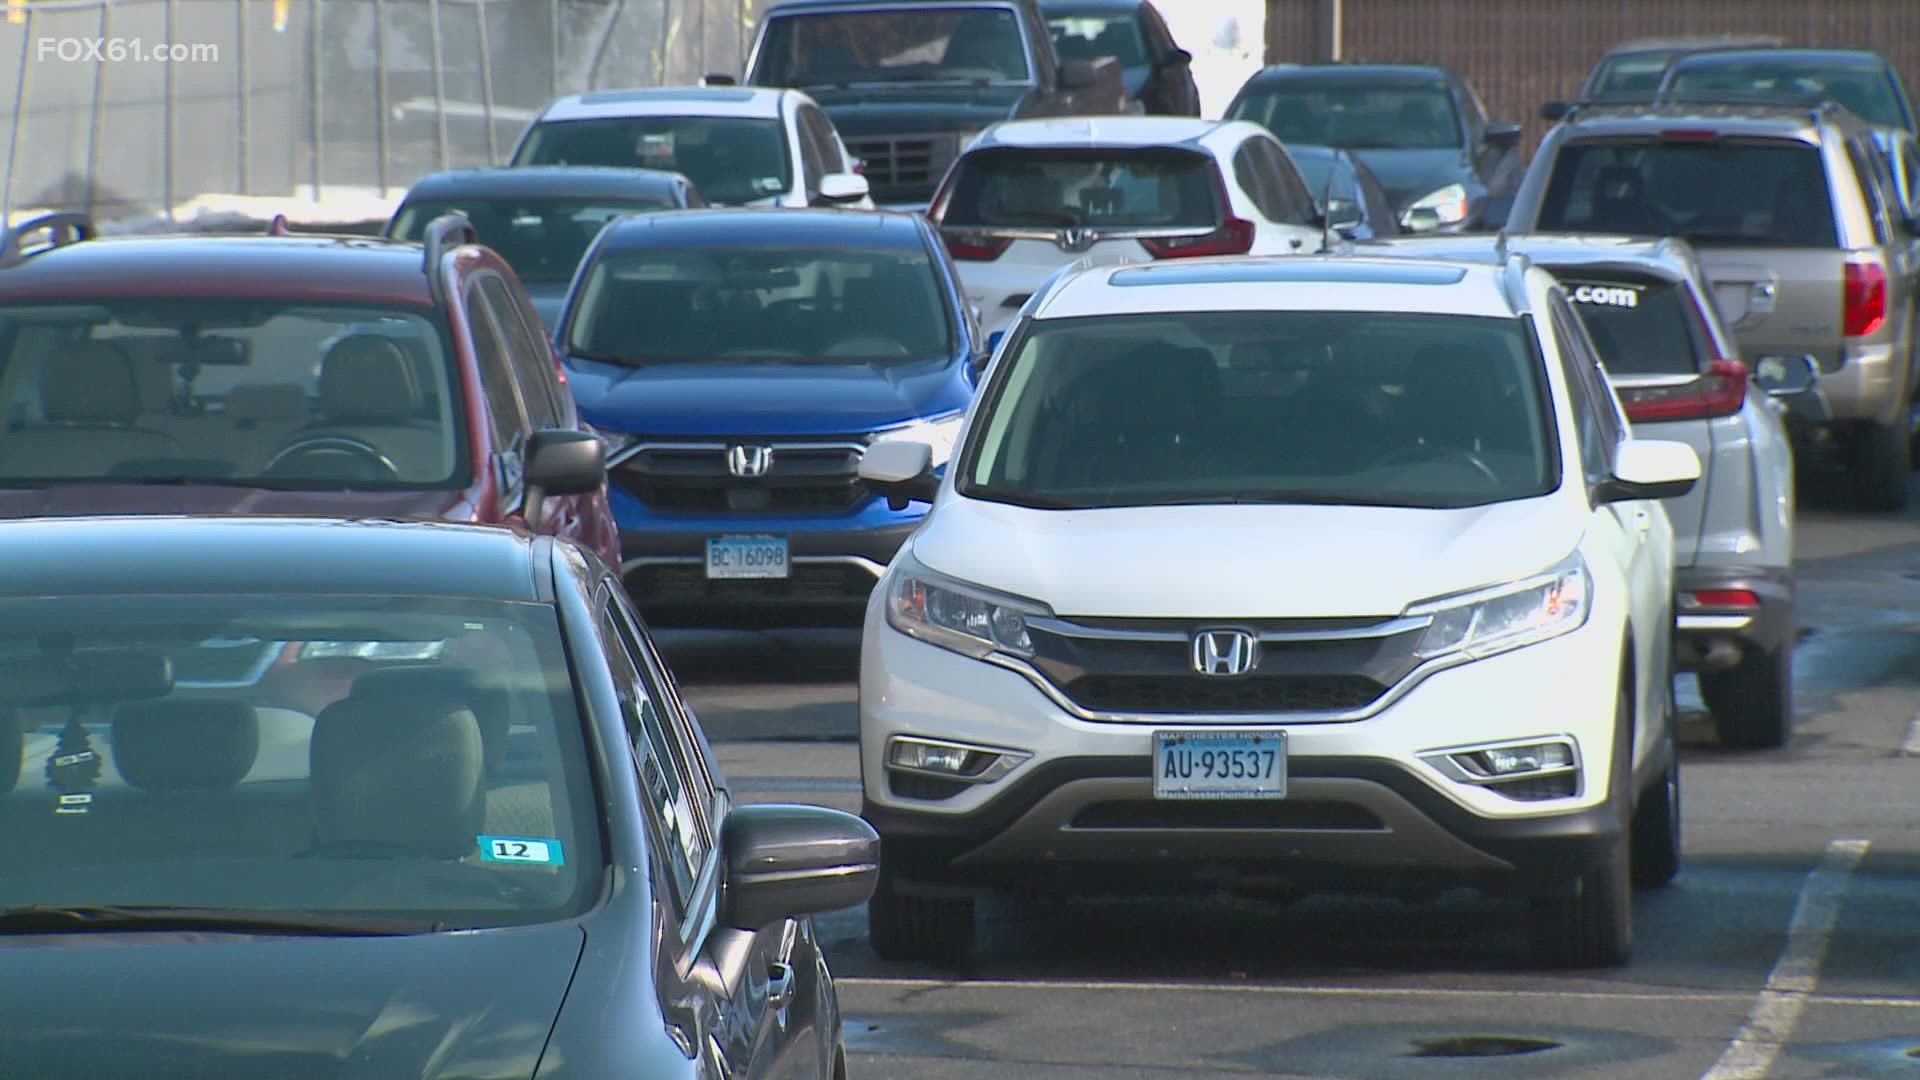 Car buyers face empty lots, delays, higher prices